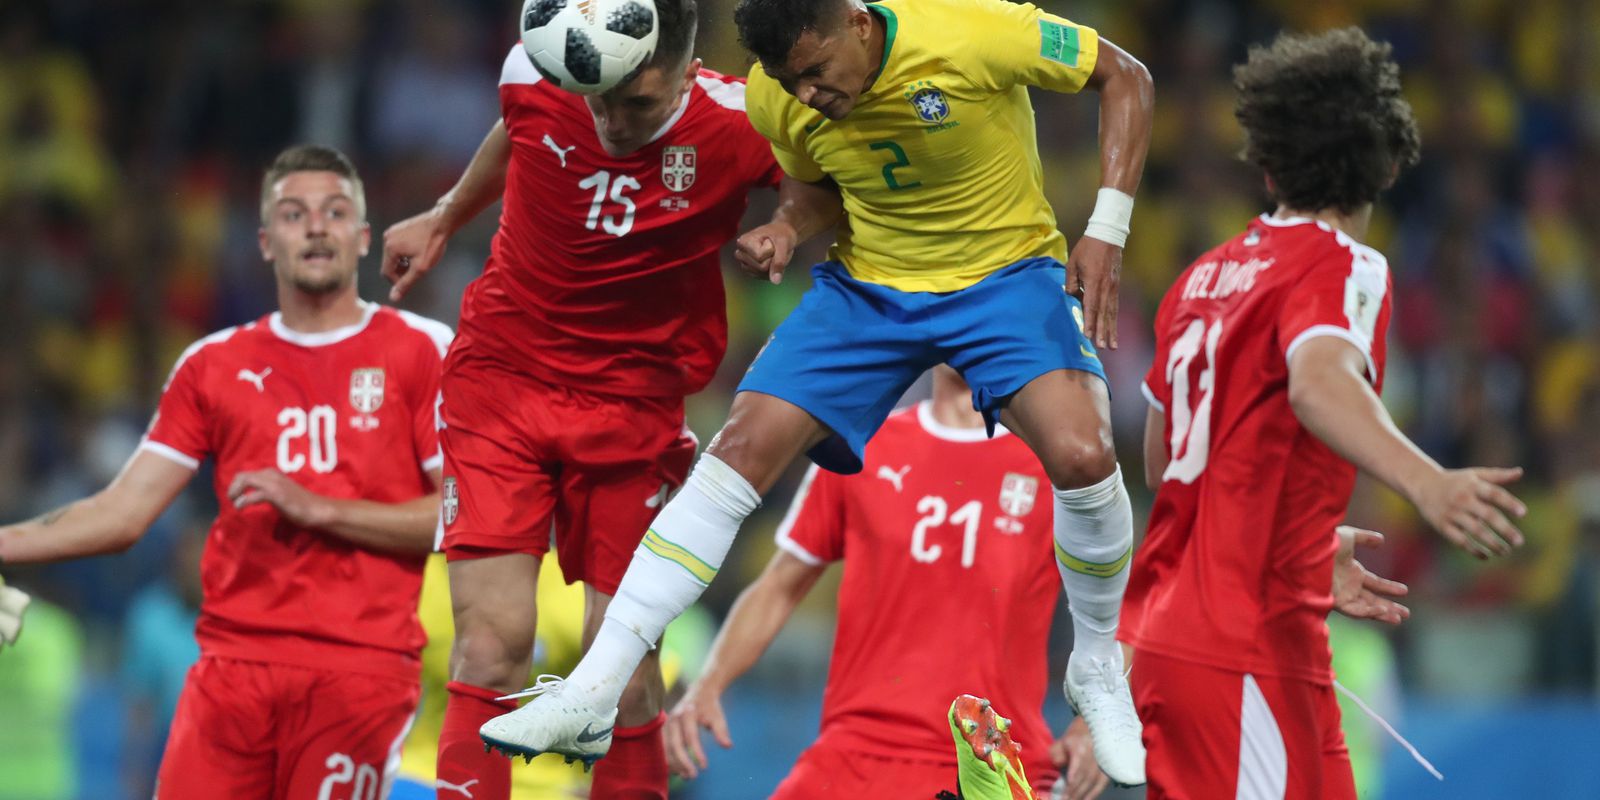 Serbia meets Brazil again in a World Cup